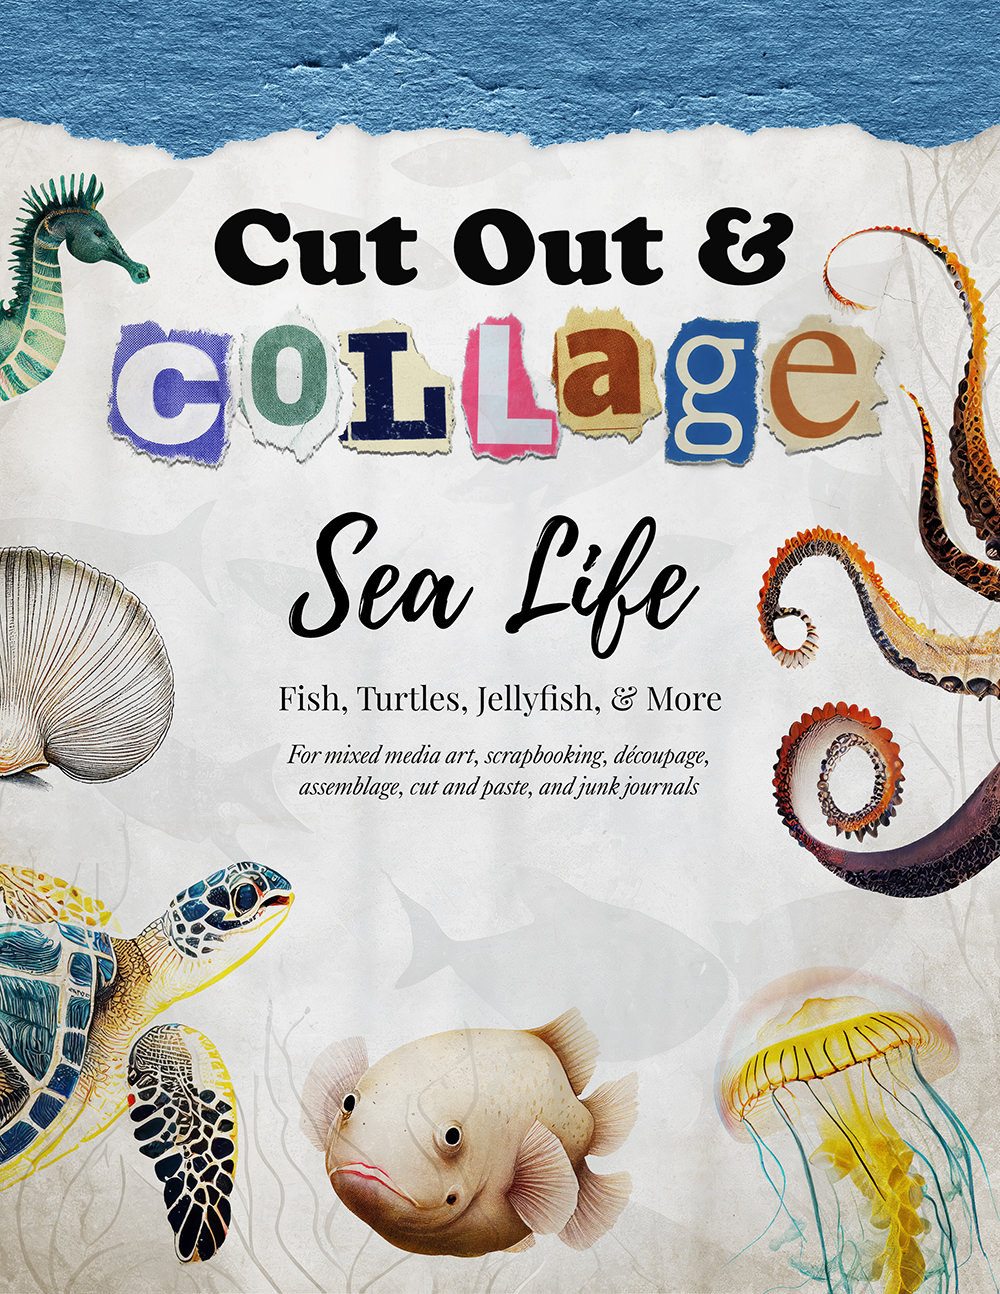 Cut Out and Collage: Sea Life